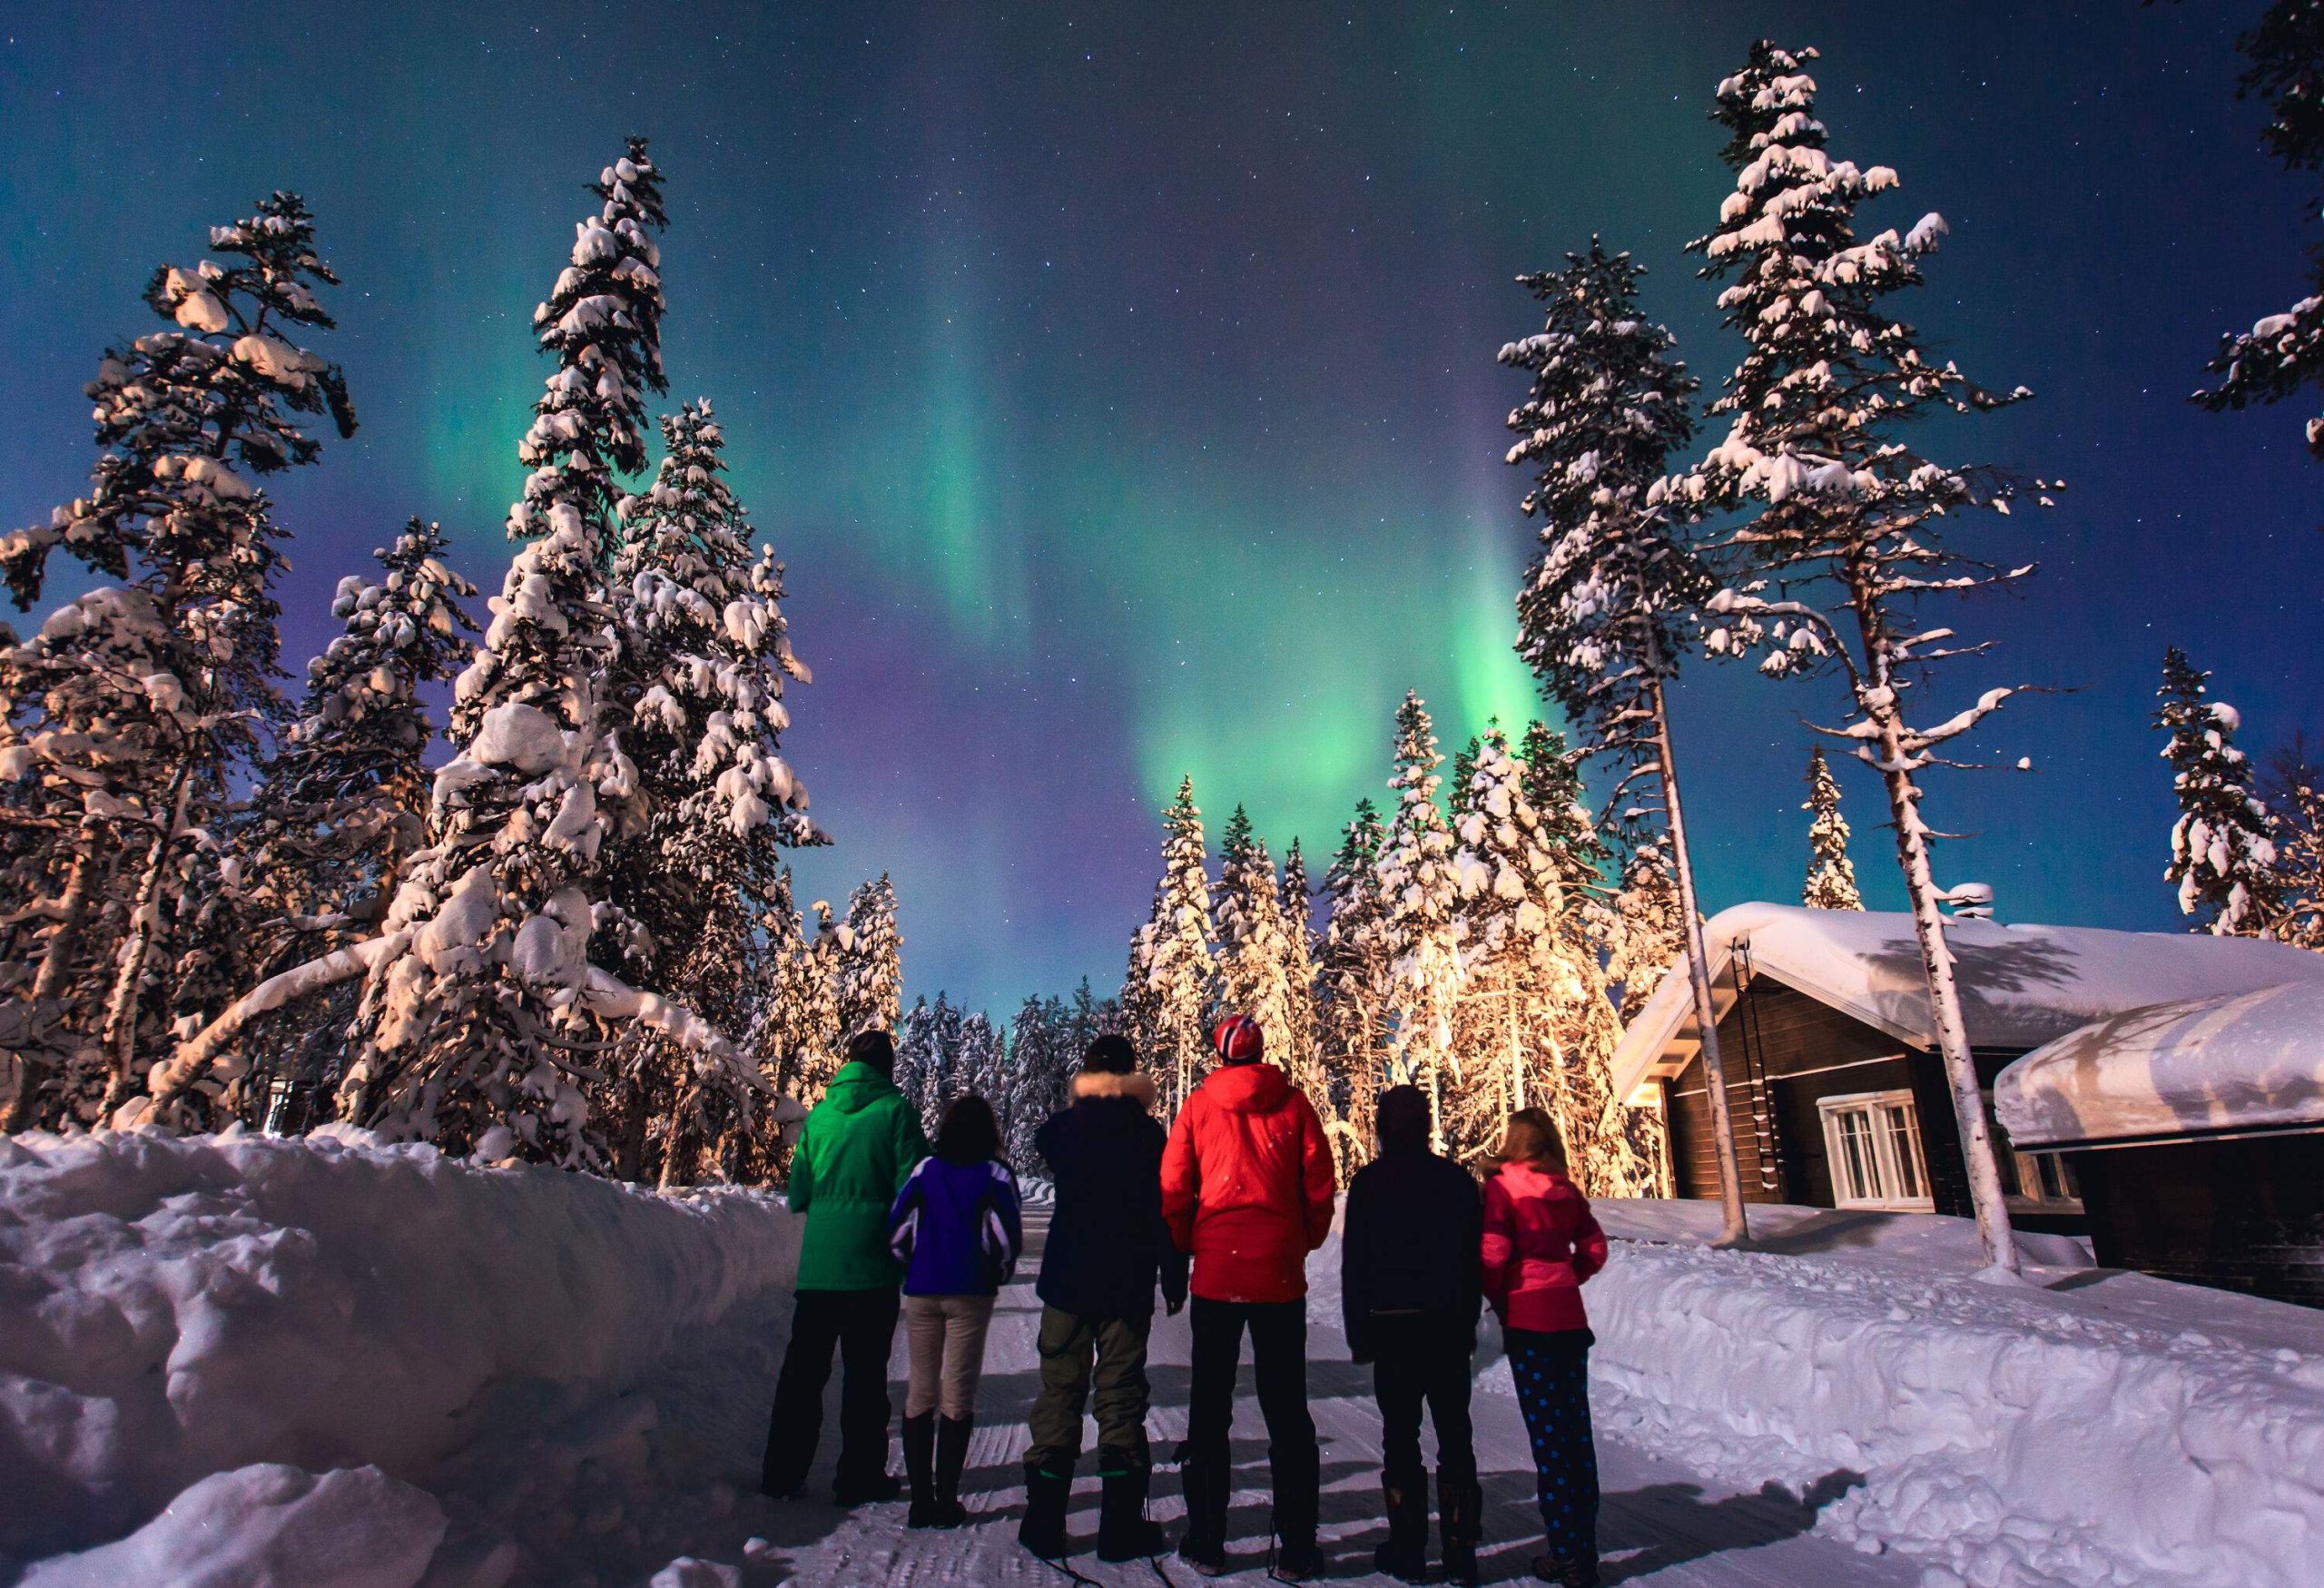 A group of friends lined up along a road to view the beautiful Northern Lights in a snow-covered village.